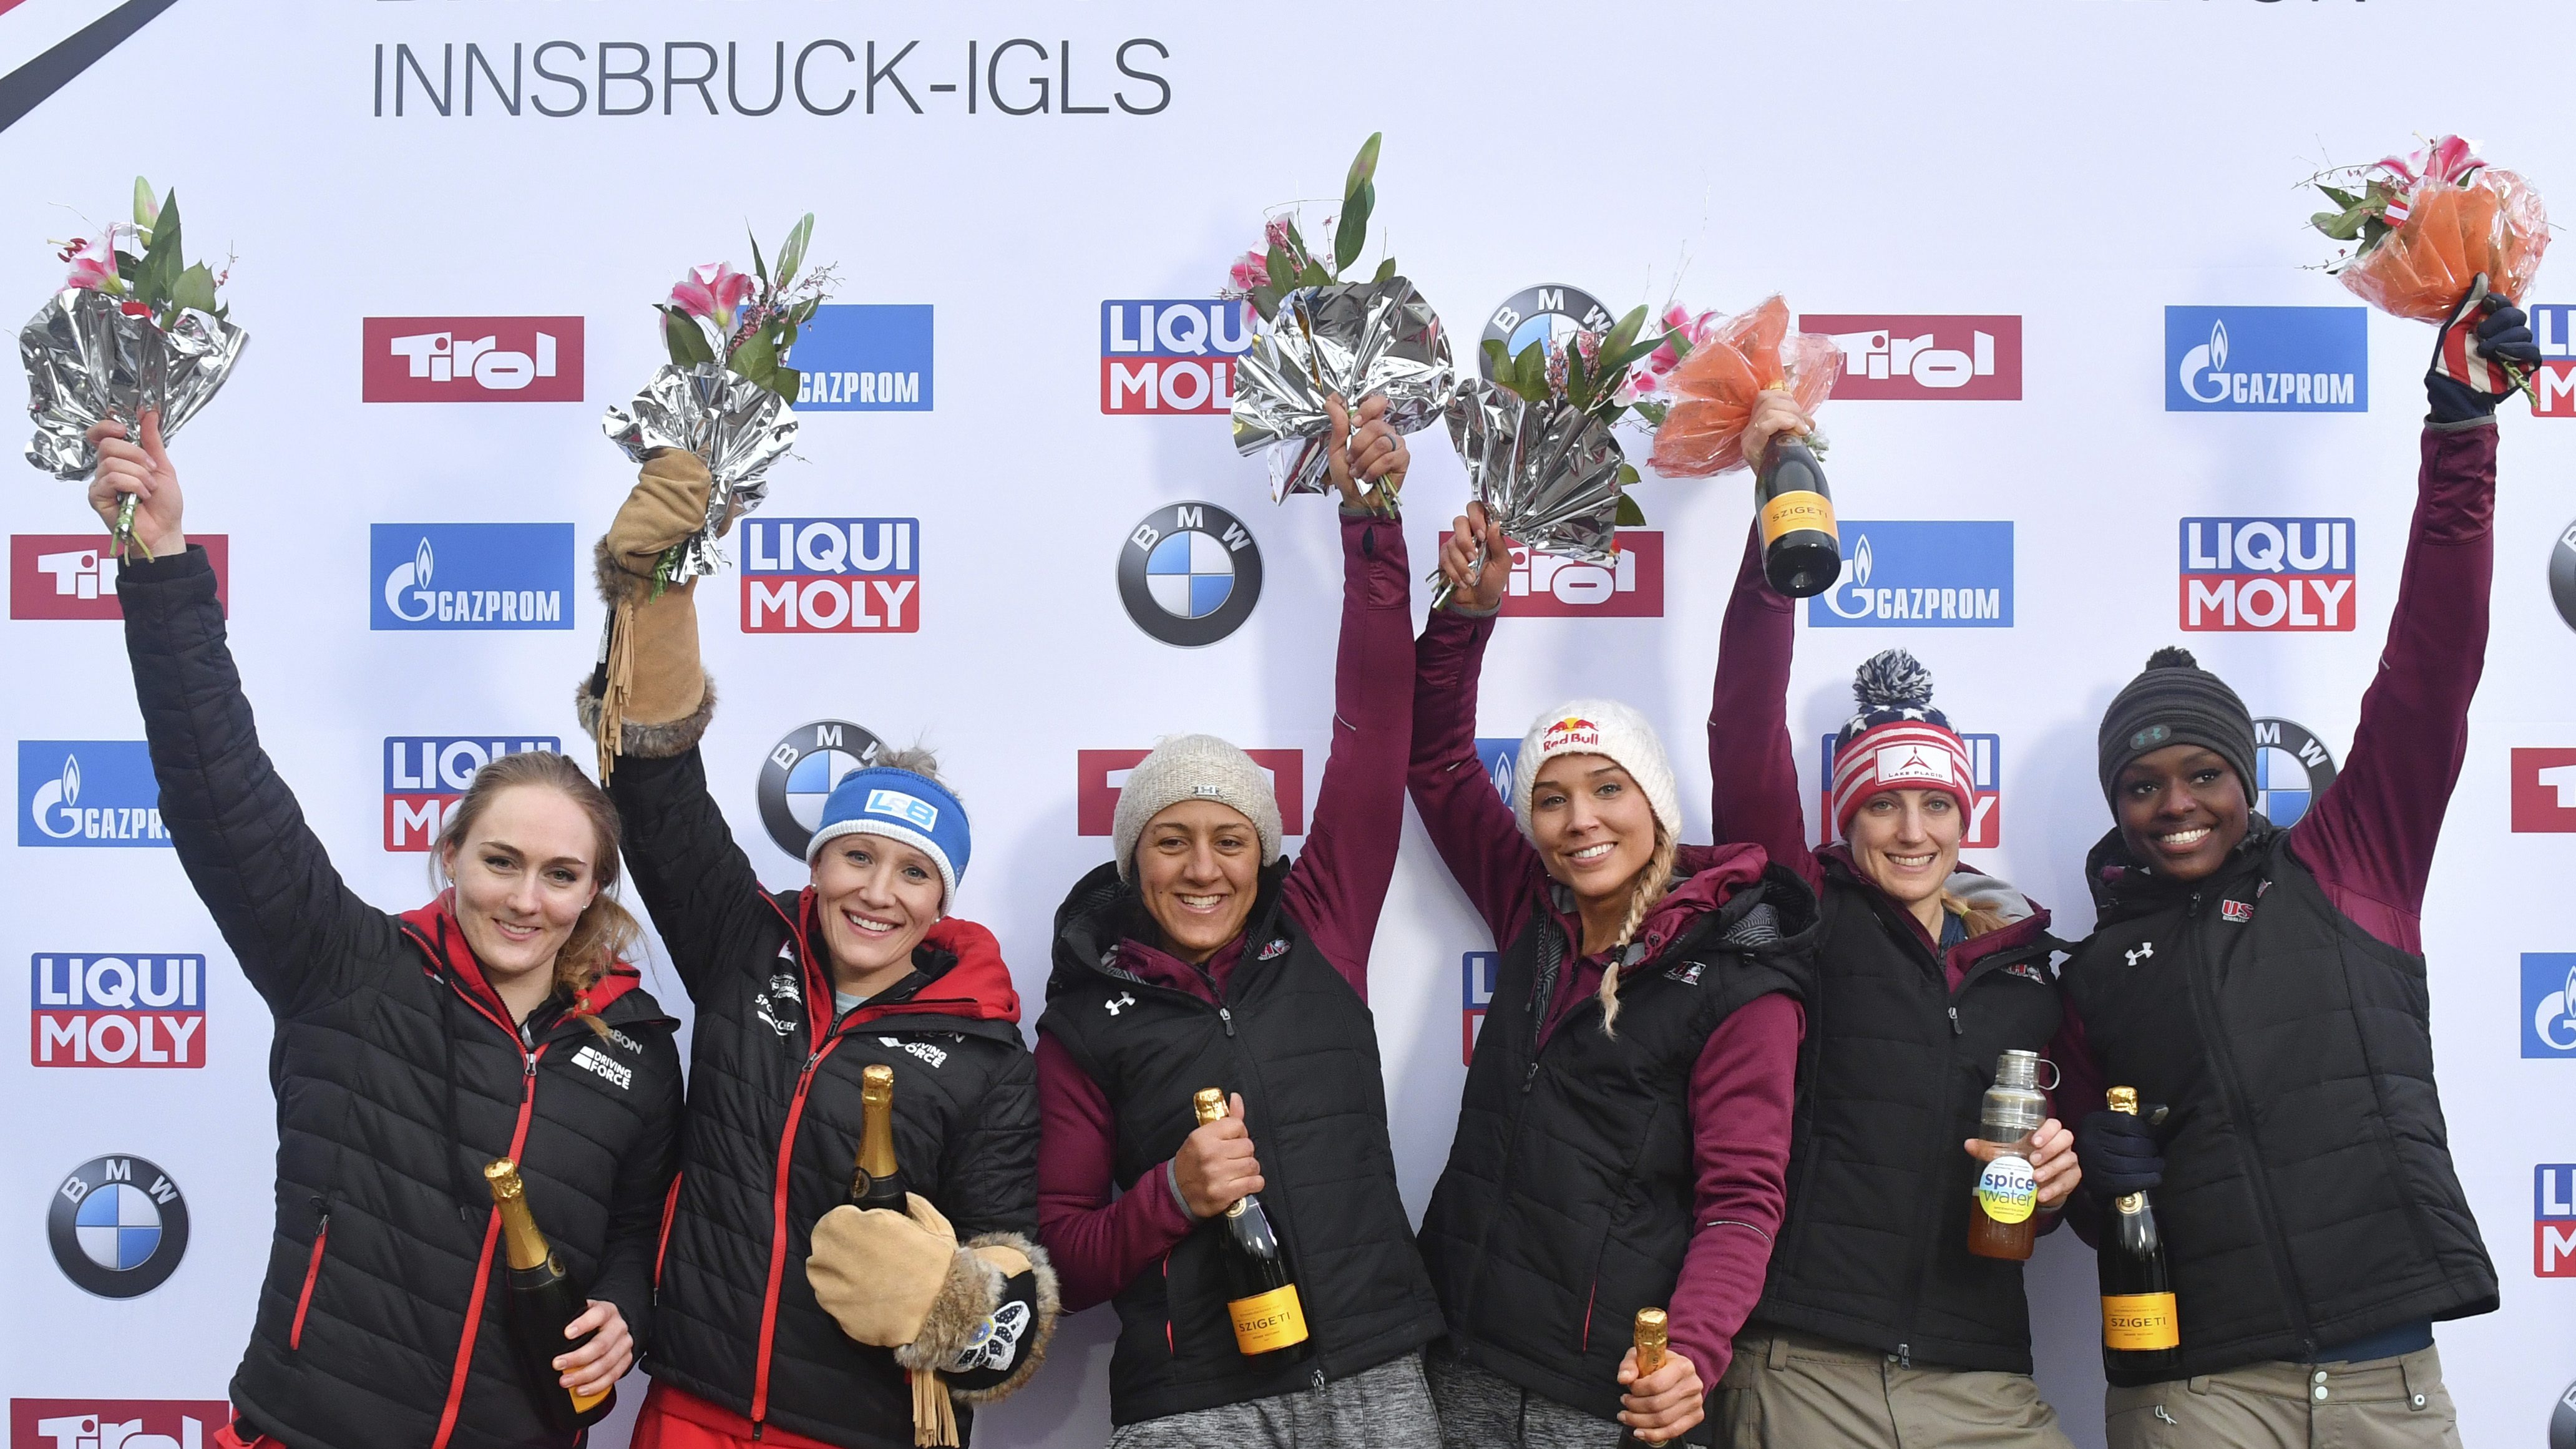 Canada's second placed Melissa Lotholz, from left to right, Kaillie Humphries, the winners Elana Meyers Taylor and Lolo Jones of the United States and third placed Jamie Greubel Poser and Aja Evans of the Unites States celebrate after the women's two-man bobsled World Cup race in Igls, near Innsbruck, Austria, Saturday, Feb. 4, 2017. (AP Photo/Kerstin Joensson)